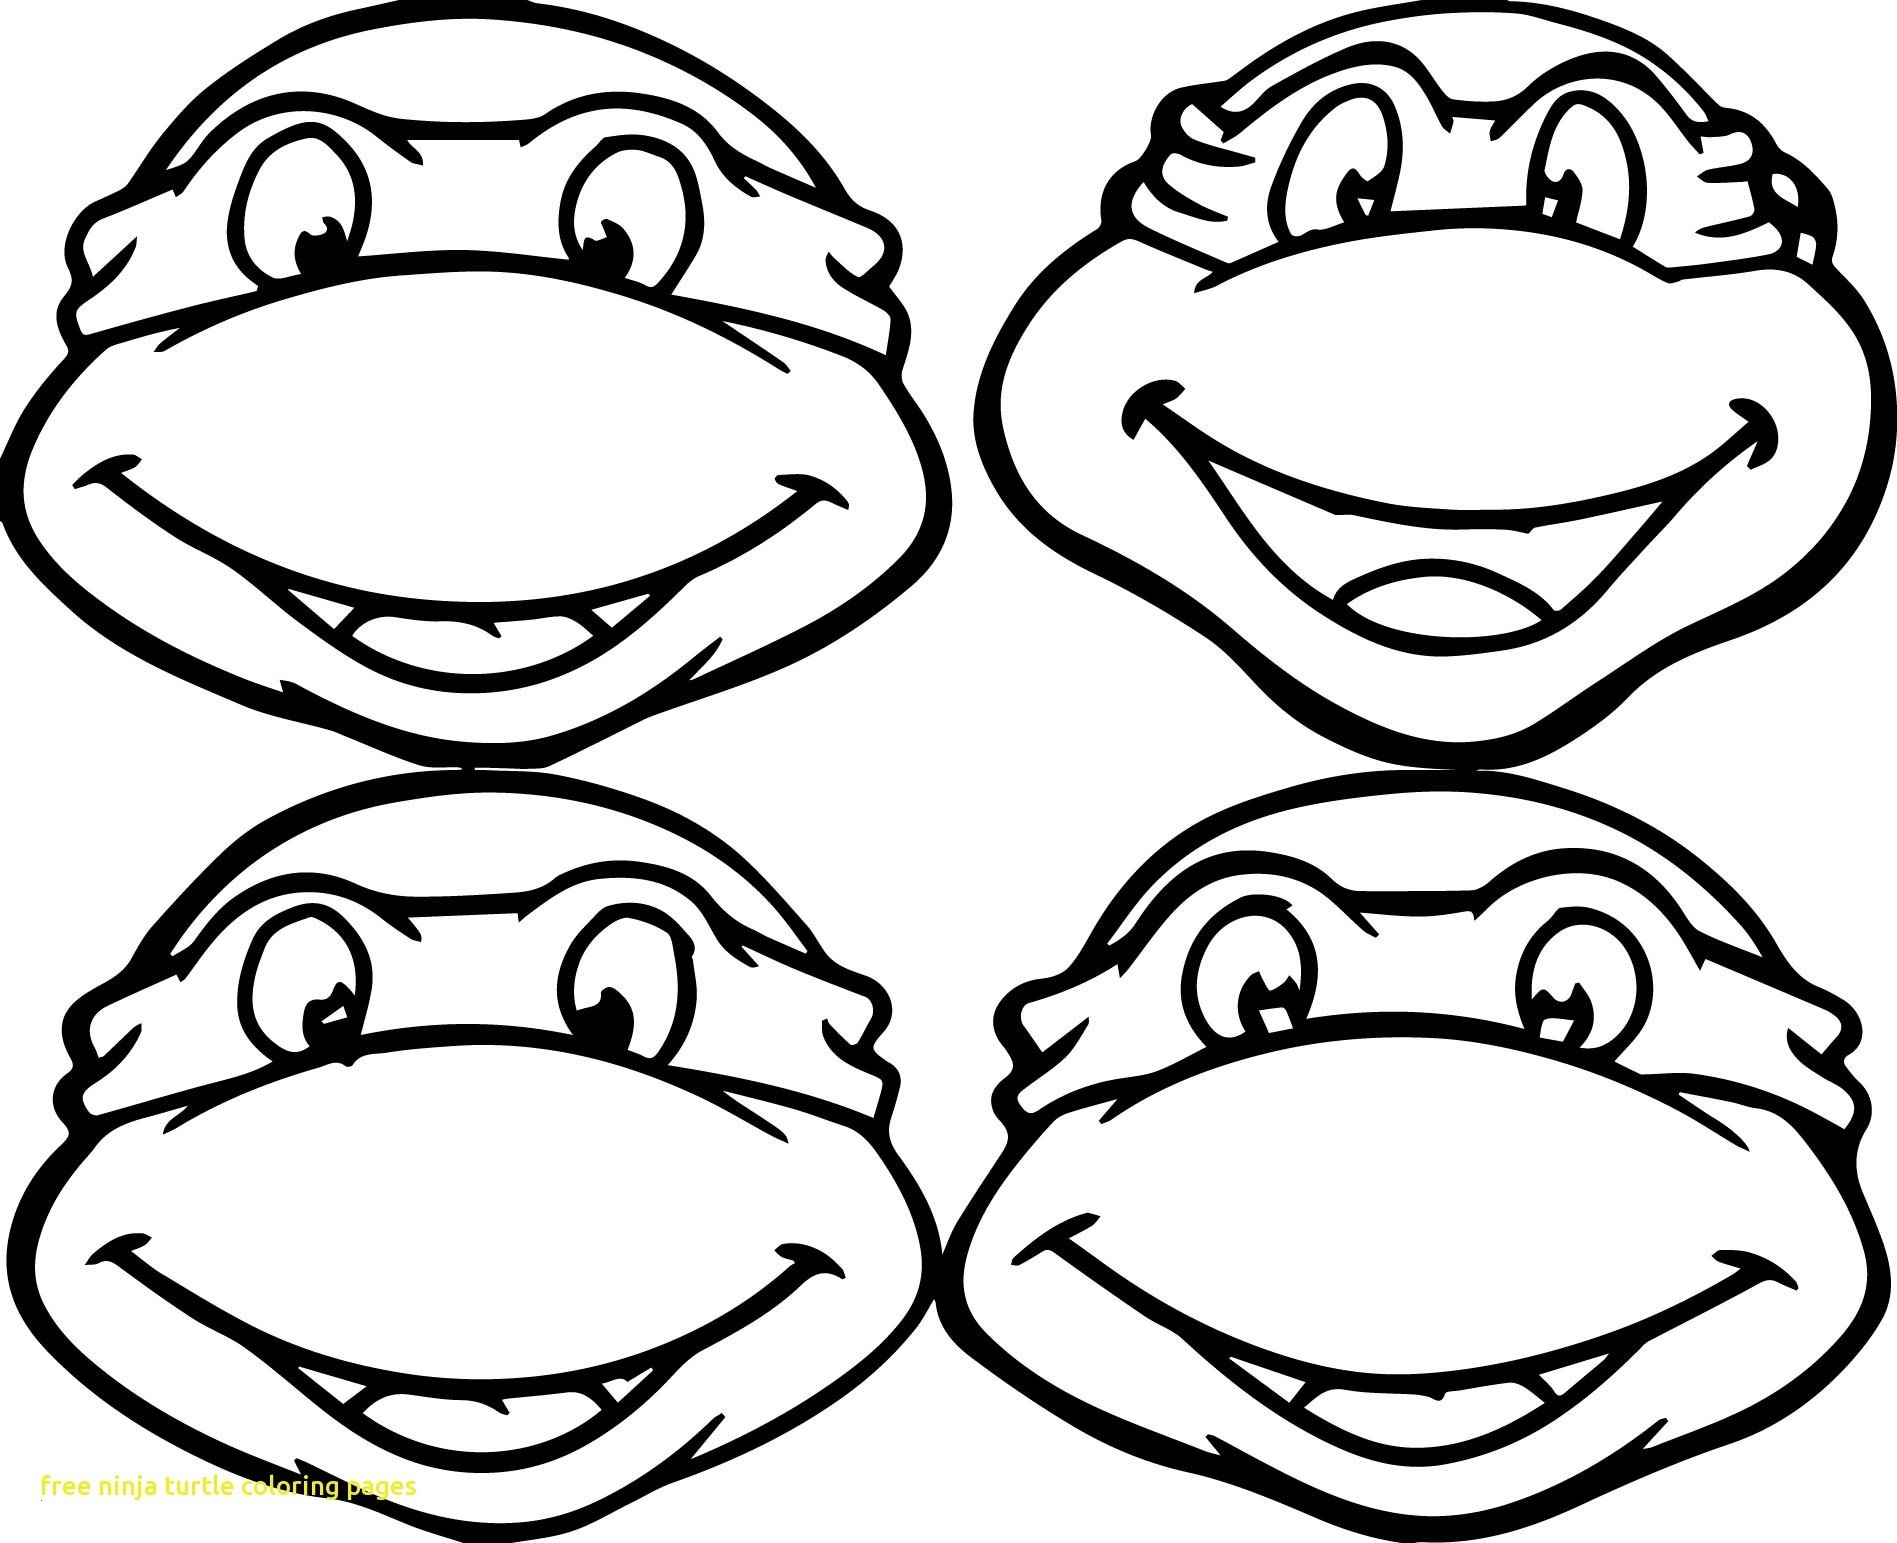 ninja-turtle-face-drawing-free-download-on-clipartmag